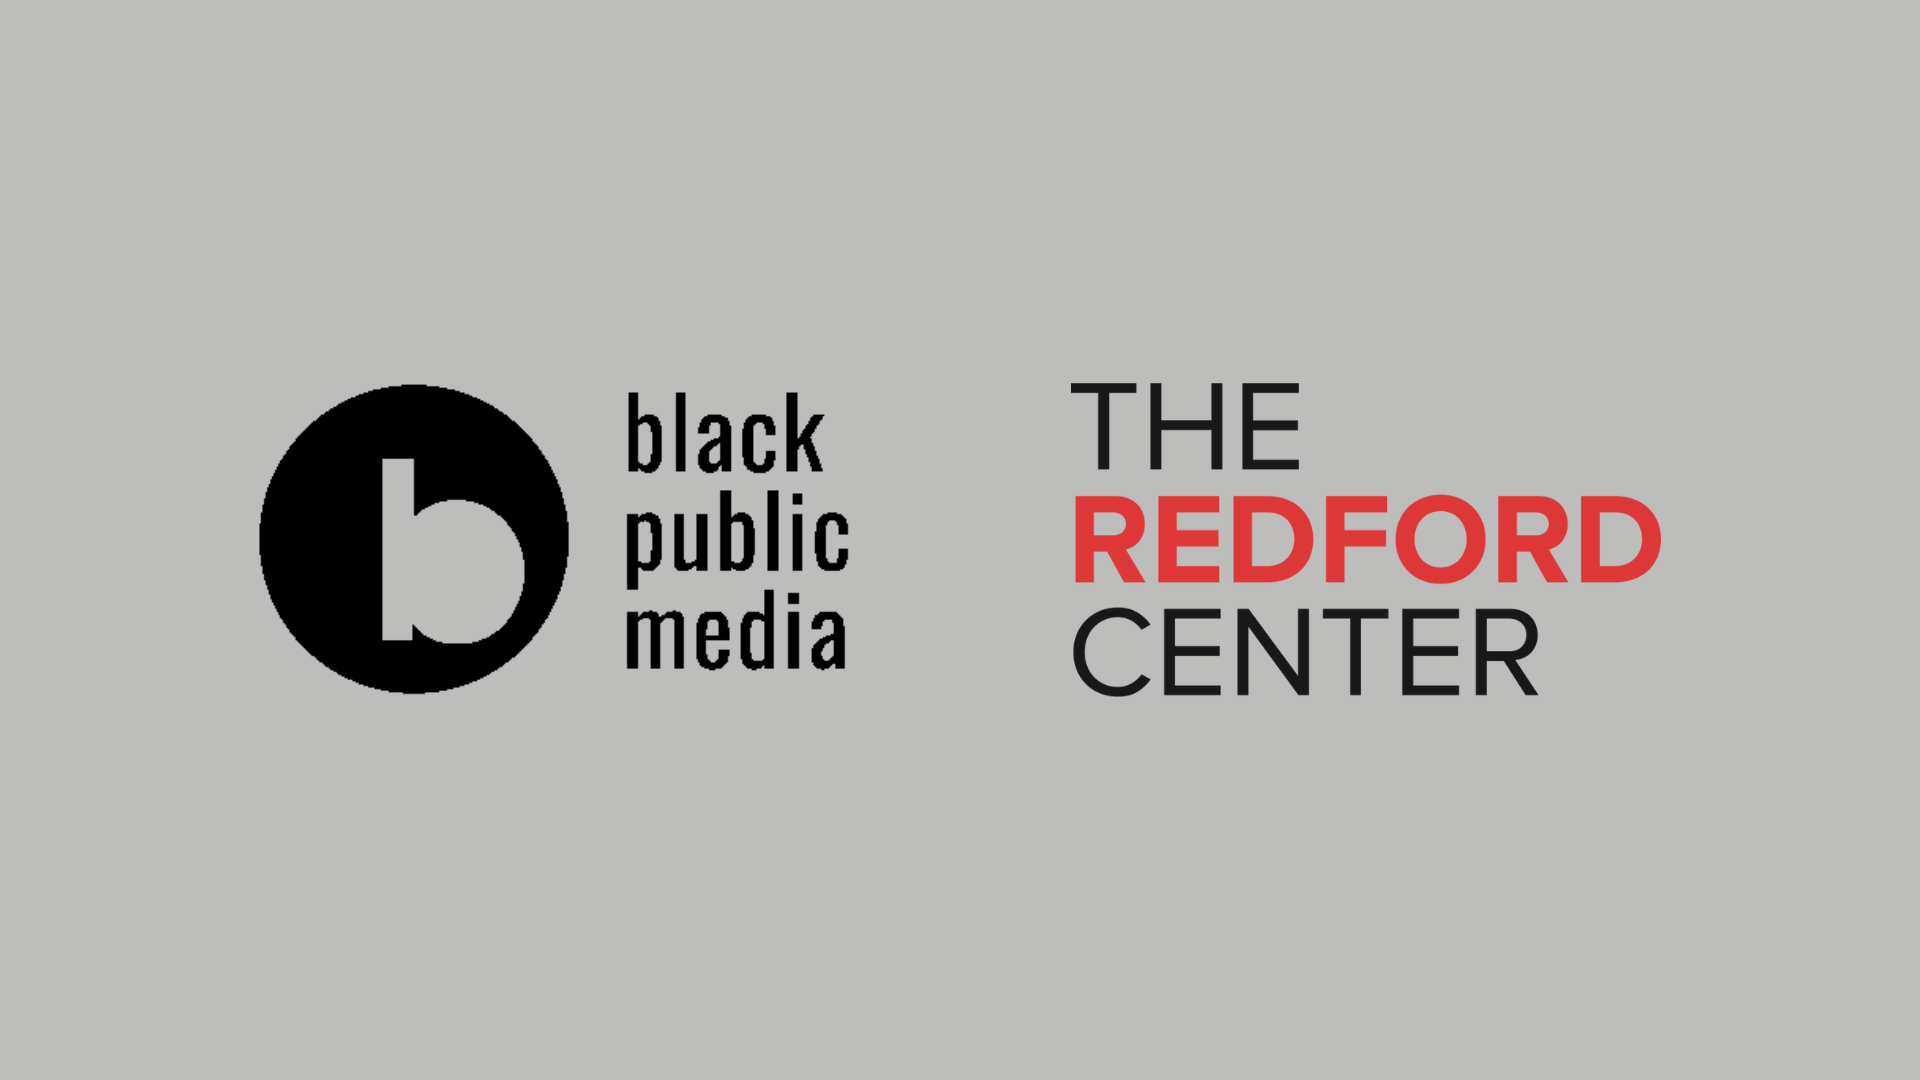 Logos of BPM and The Redford Center over a gray background.